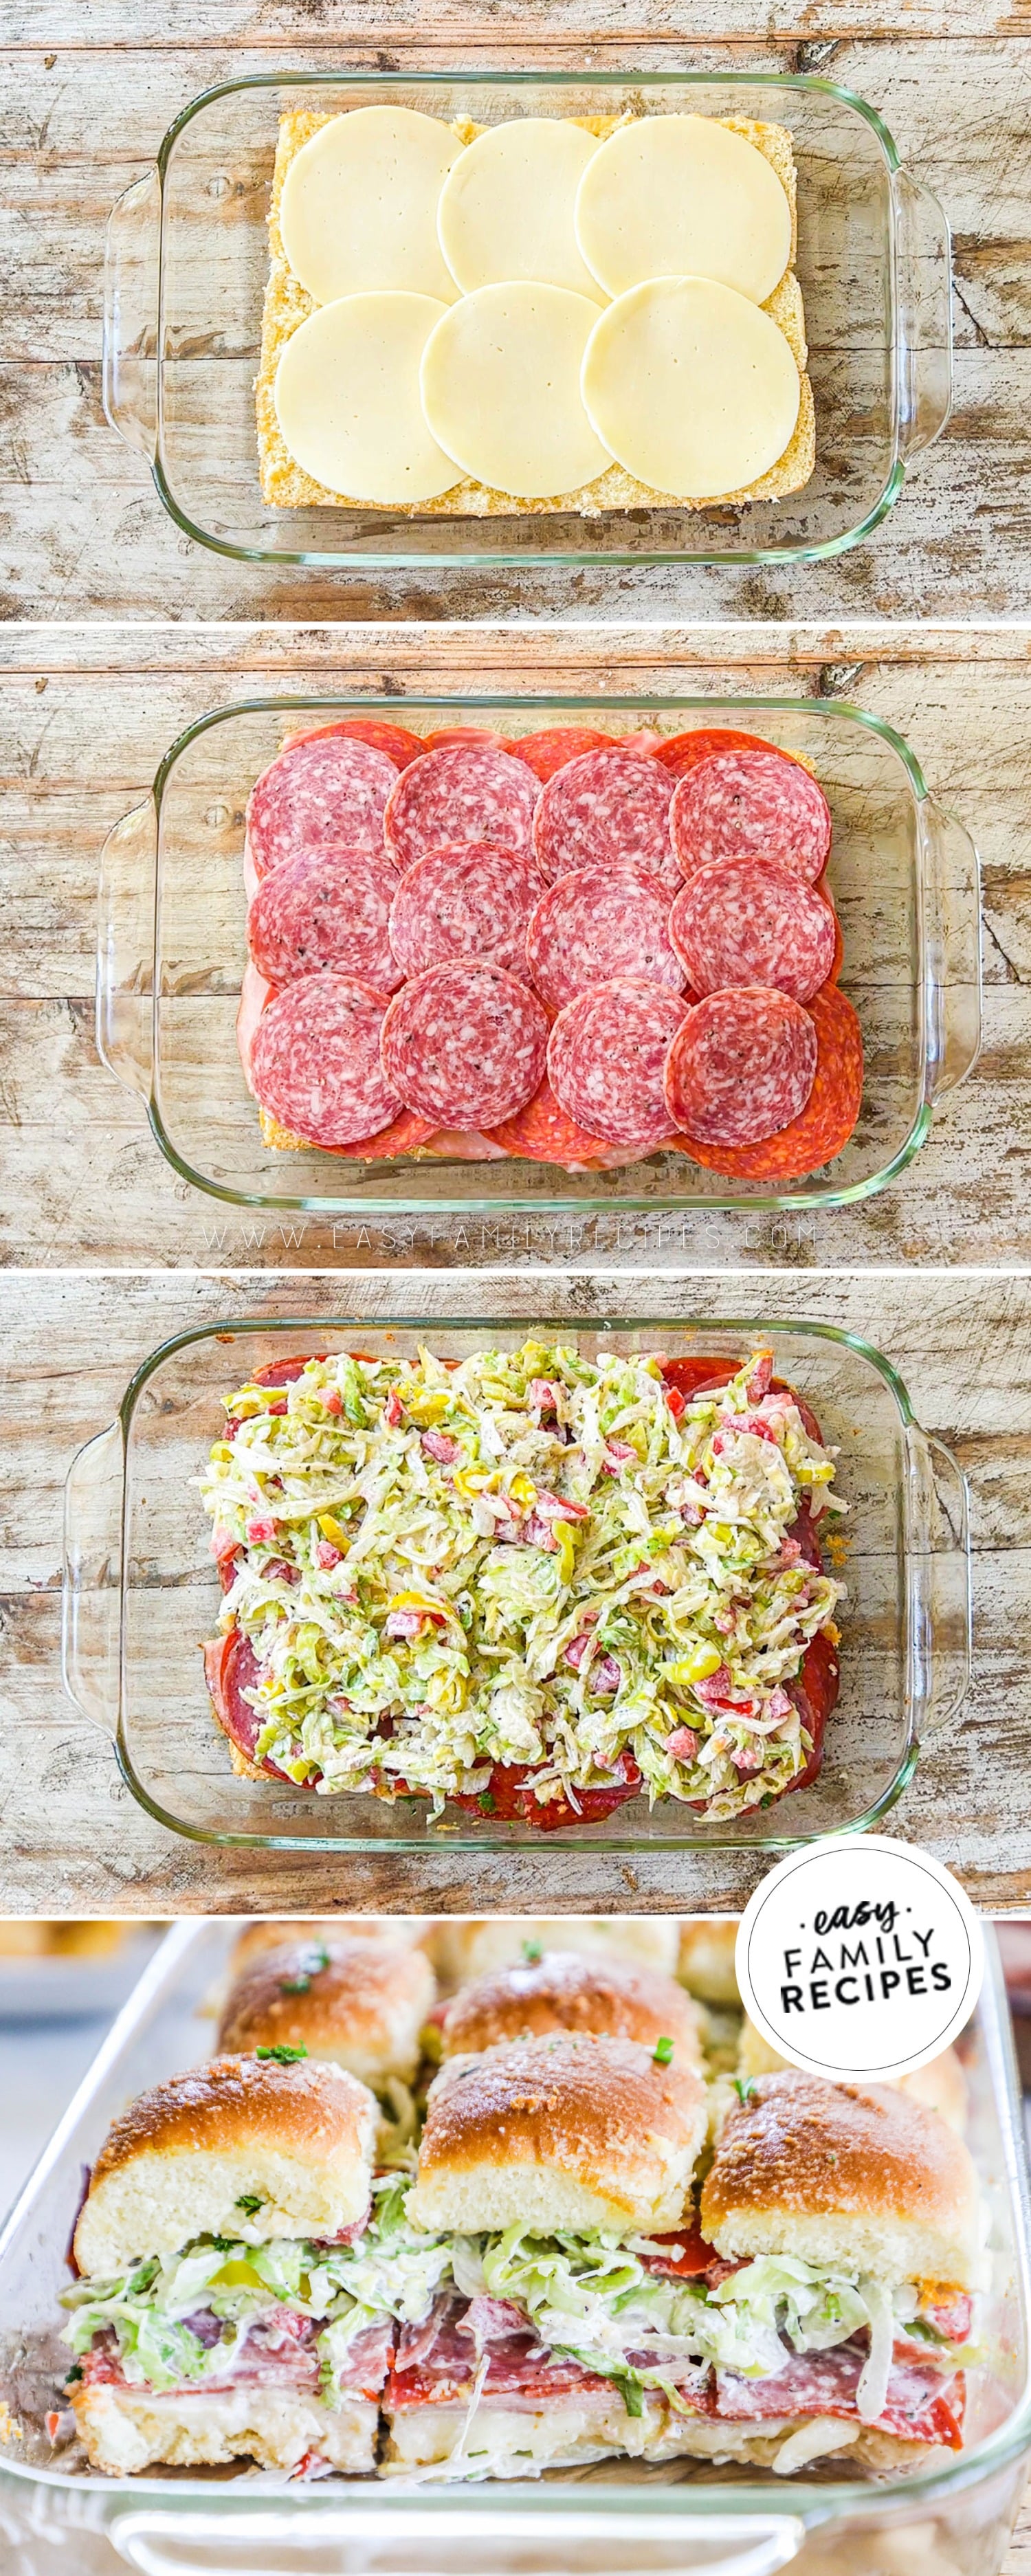 4 image vertical collage building recipe in a baking dish: 1- adding sliced provolone on top of the bottom part of Hawaiian rolls, 2- layering on the deli meats, 3- after baking with the salad added on top, and 4- side view of the grinder sandwiches to show all the layers